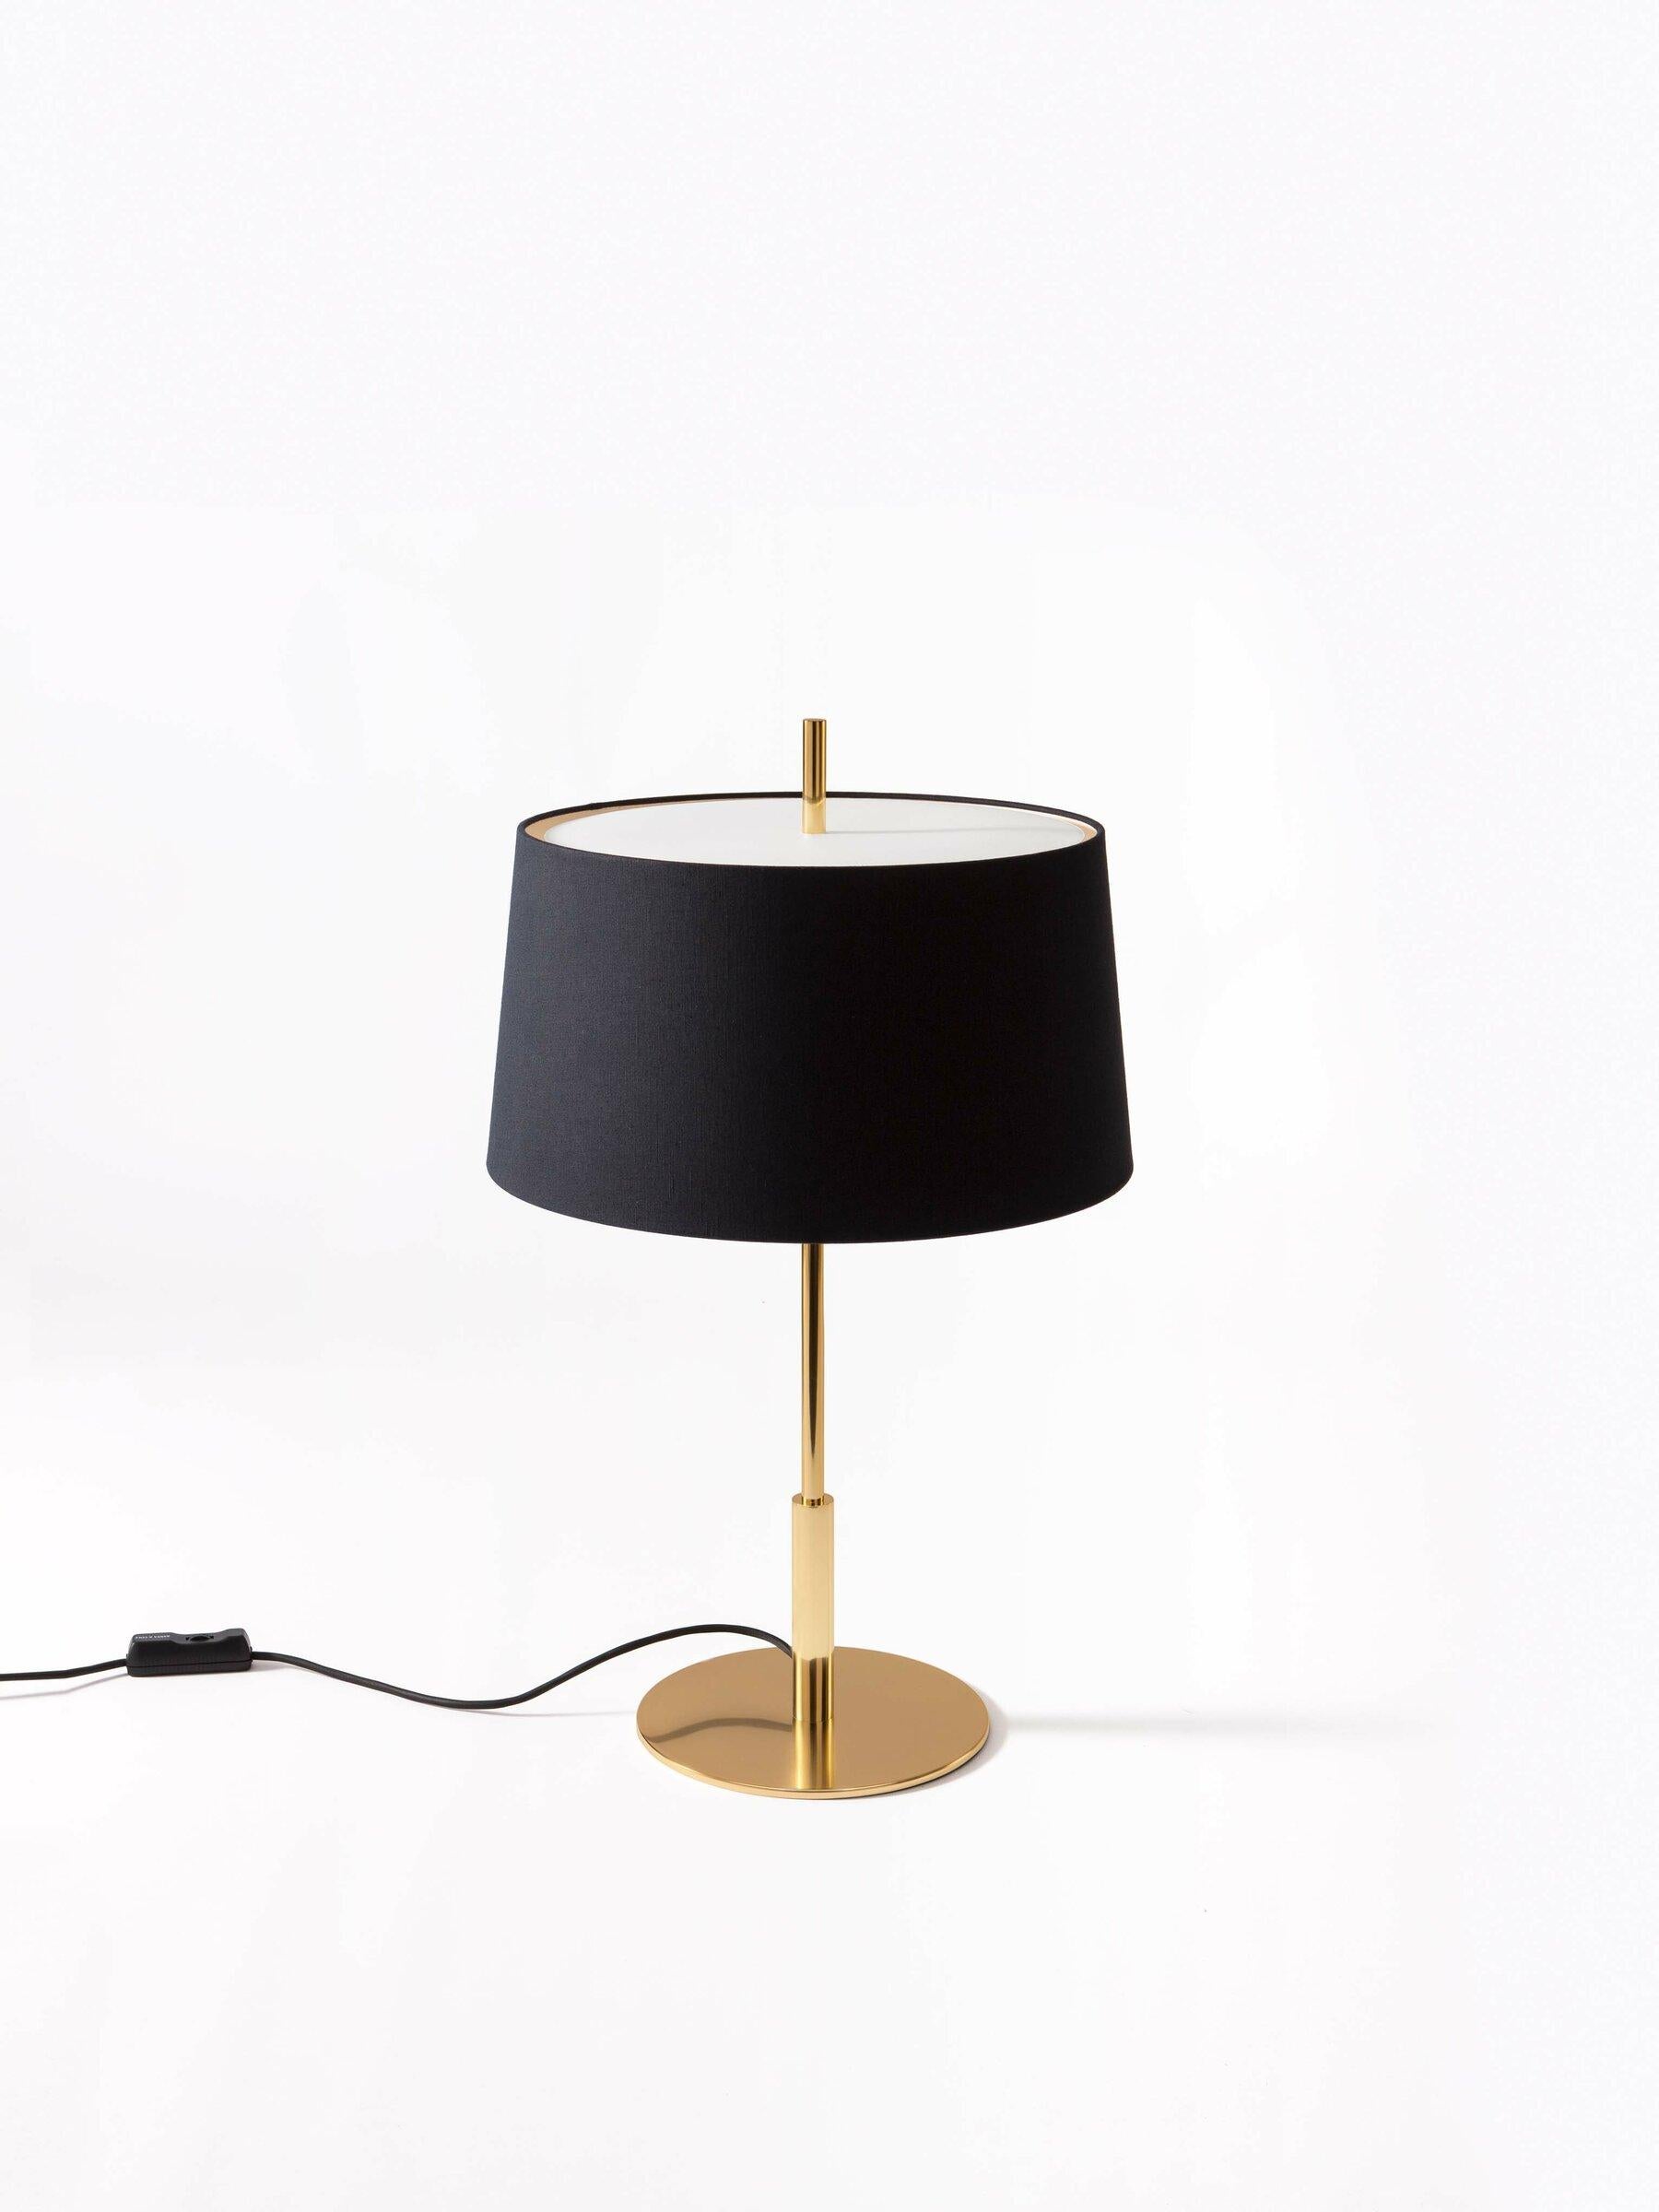 Gold Diana menor table lamp by Federico Correa, Alfonso Milá, Miguel Milá
Dimensions: D 40 x H 66 cm
Materials: Black linen, metal.
Available in black or white lampshade and in gold or nickel finish.

In keeping with the calling of its